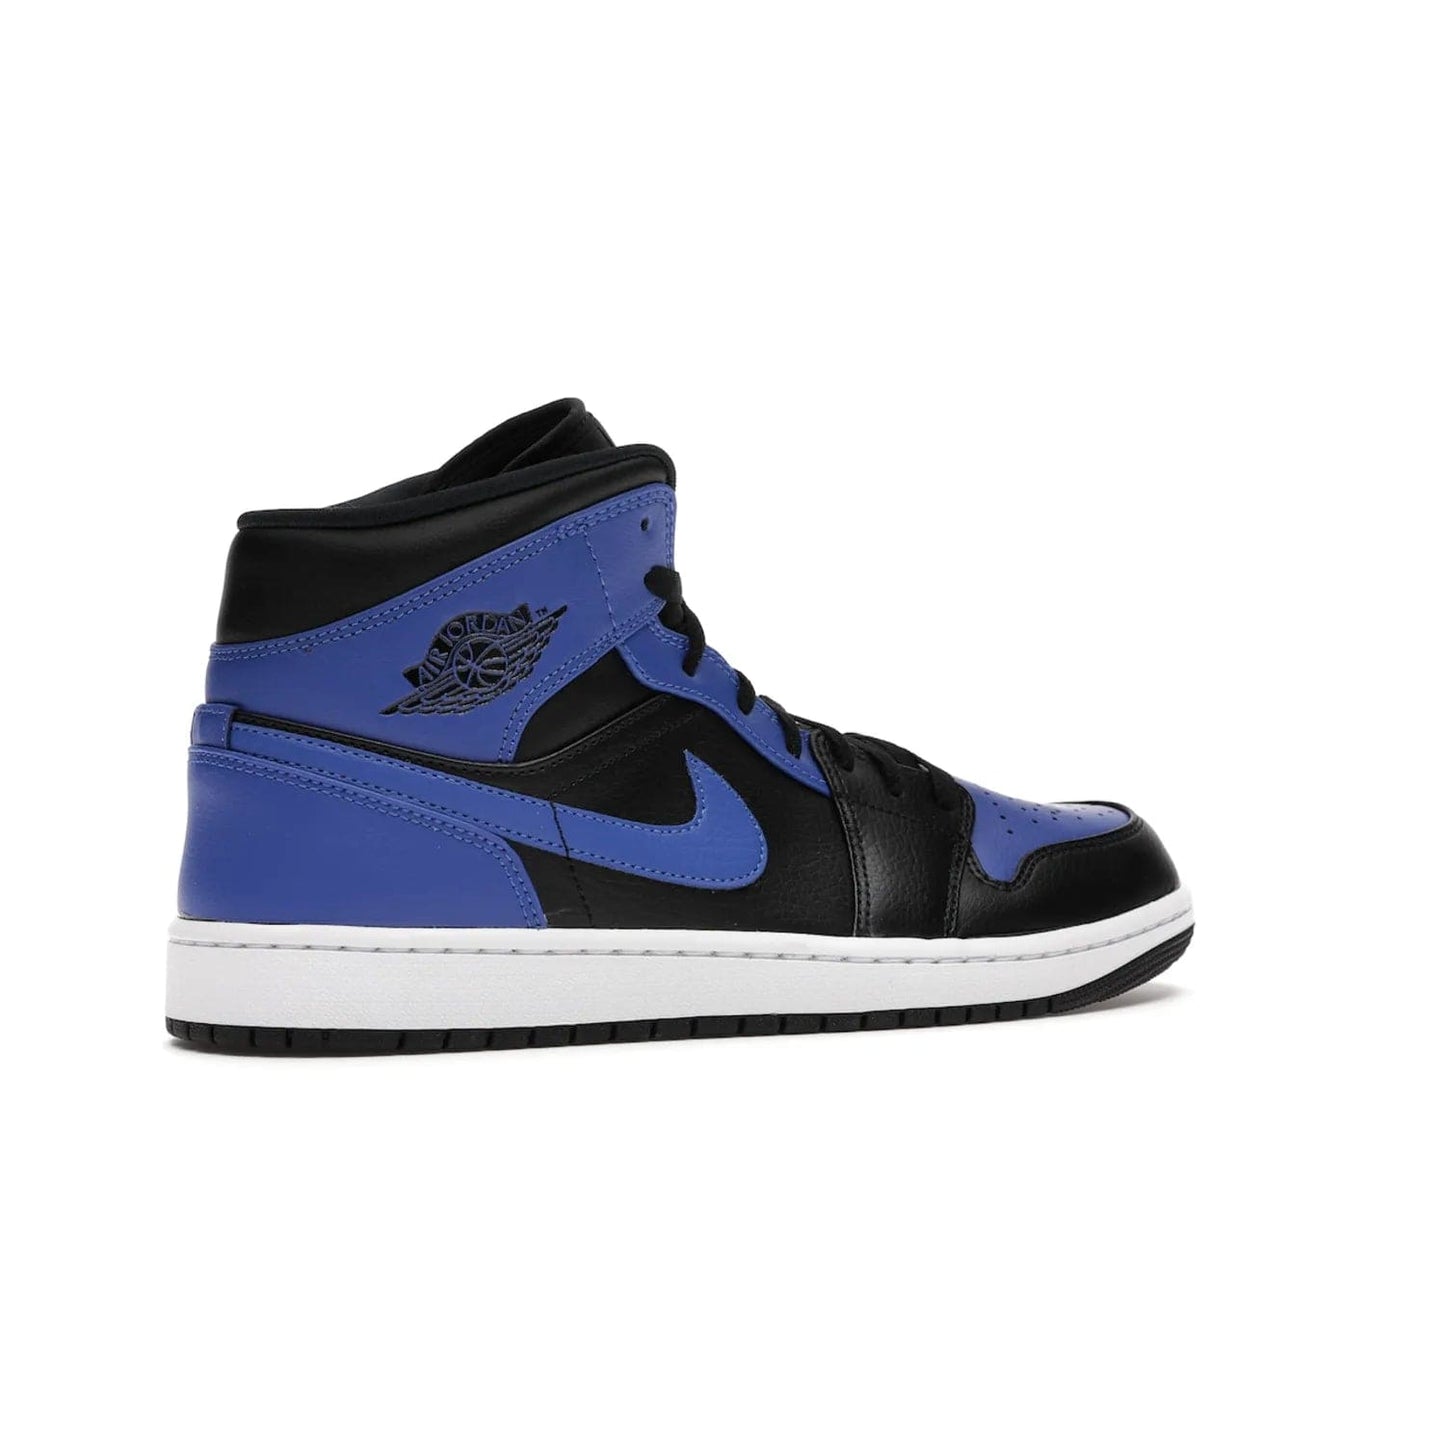 Jordan 1 Mid Hyper Royal Tumbled Leather - Image 34 - Only at www.BallersClubKickz.com - Iconic colorway of the Air Jordan 1 Mid Black Royal Tumbled Leather. Features a black tumbled leather upper, royal blue leather overlays, white midsole & black rubber outsole. Released December 2020. Adds premium style to any collection.